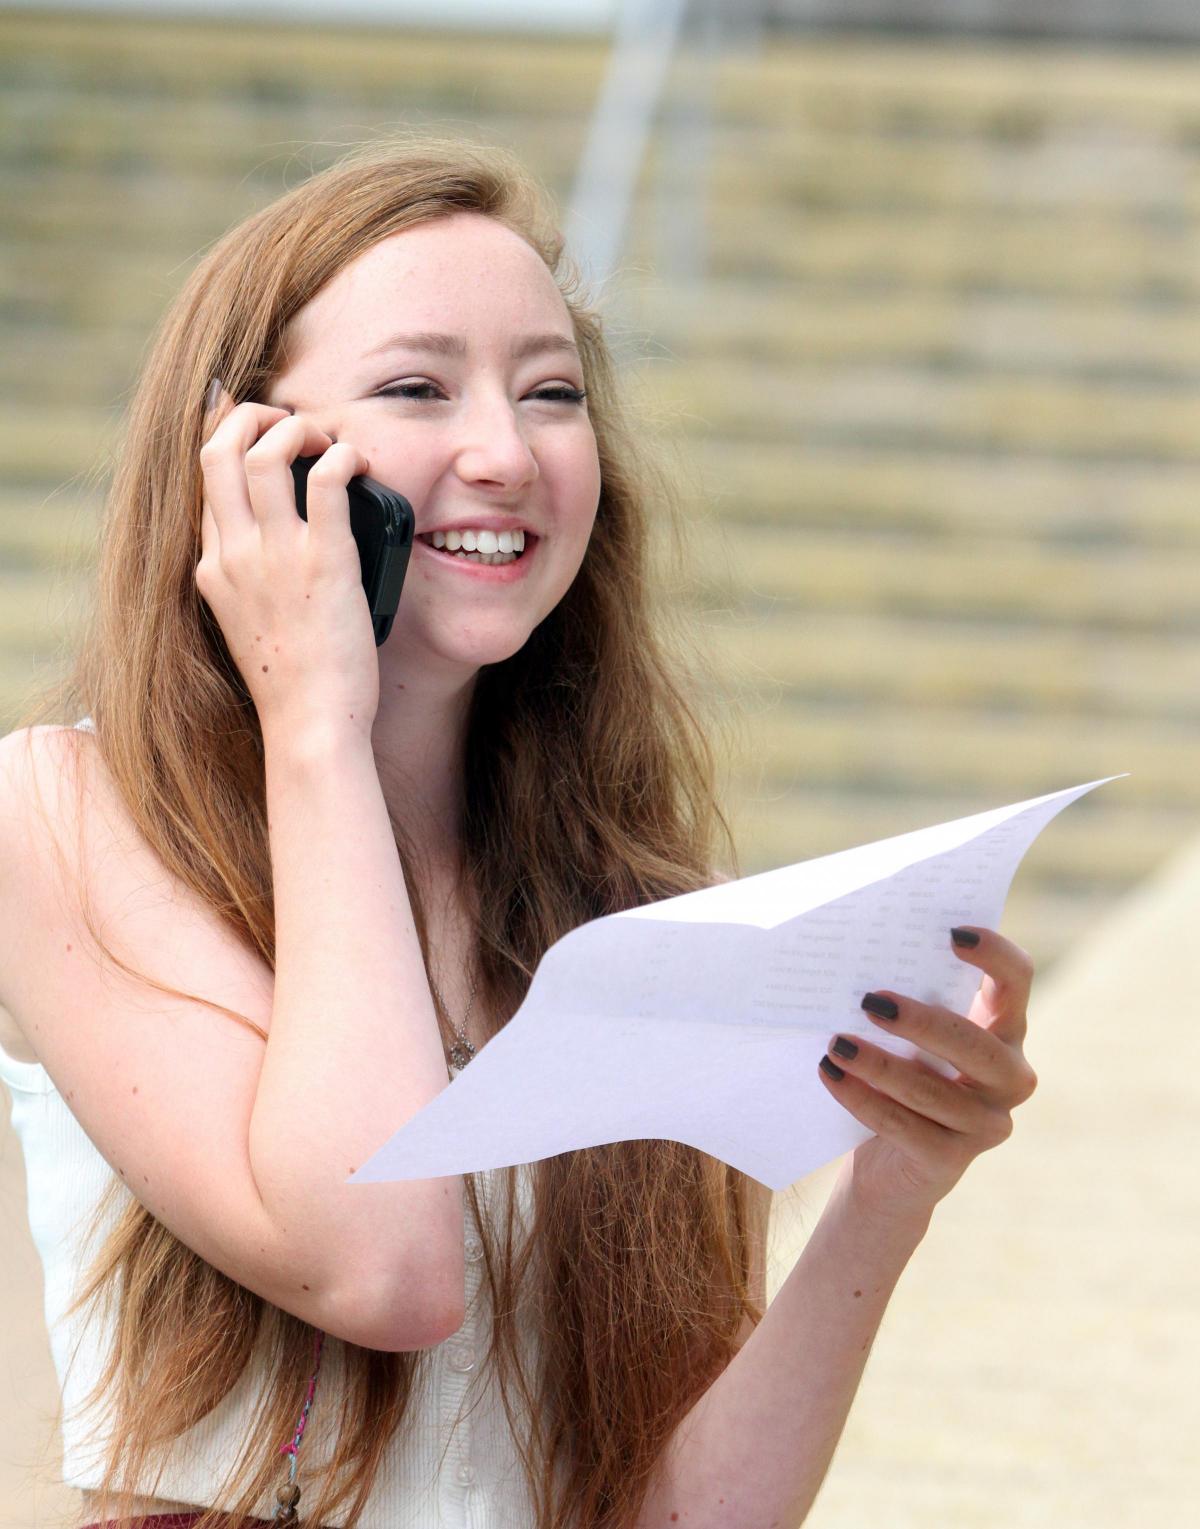 Craven district students collect their A-level results